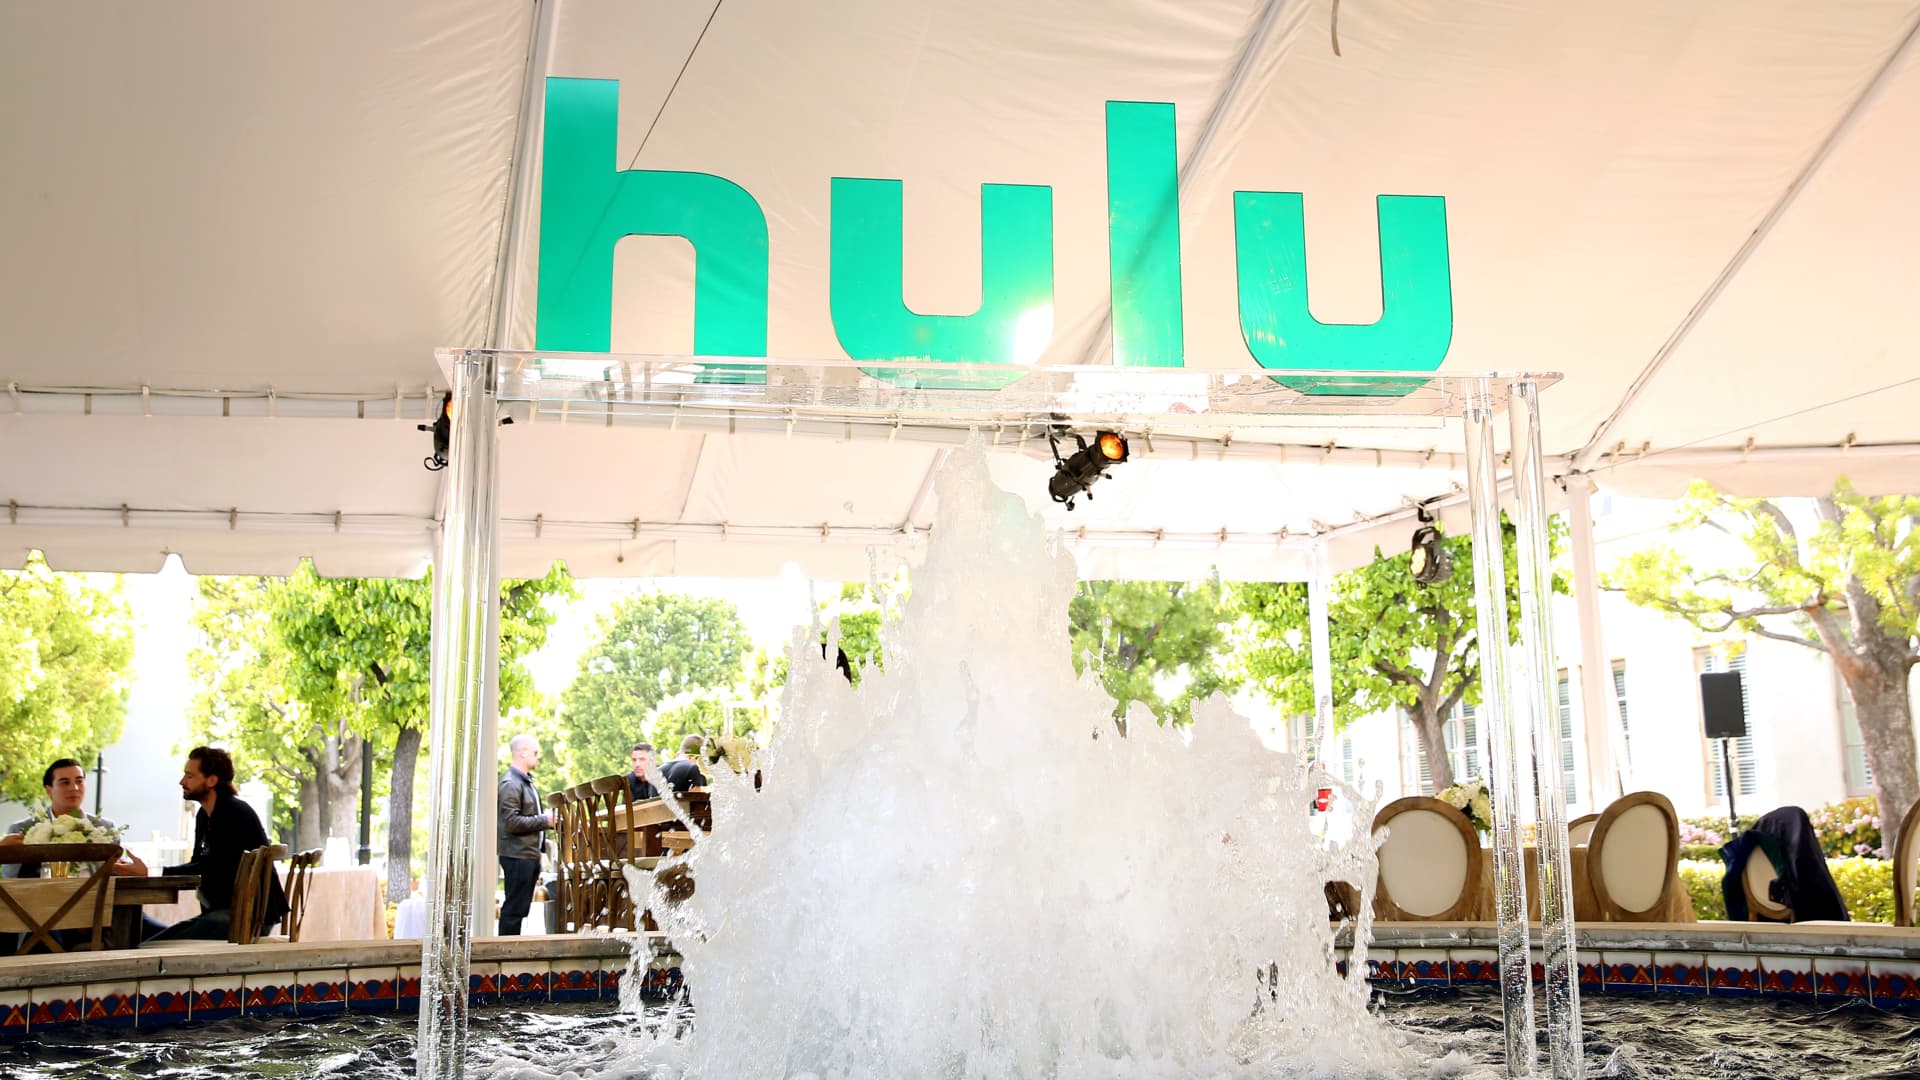 Comcast executives expect Disney to buy remaining stake in Hulu